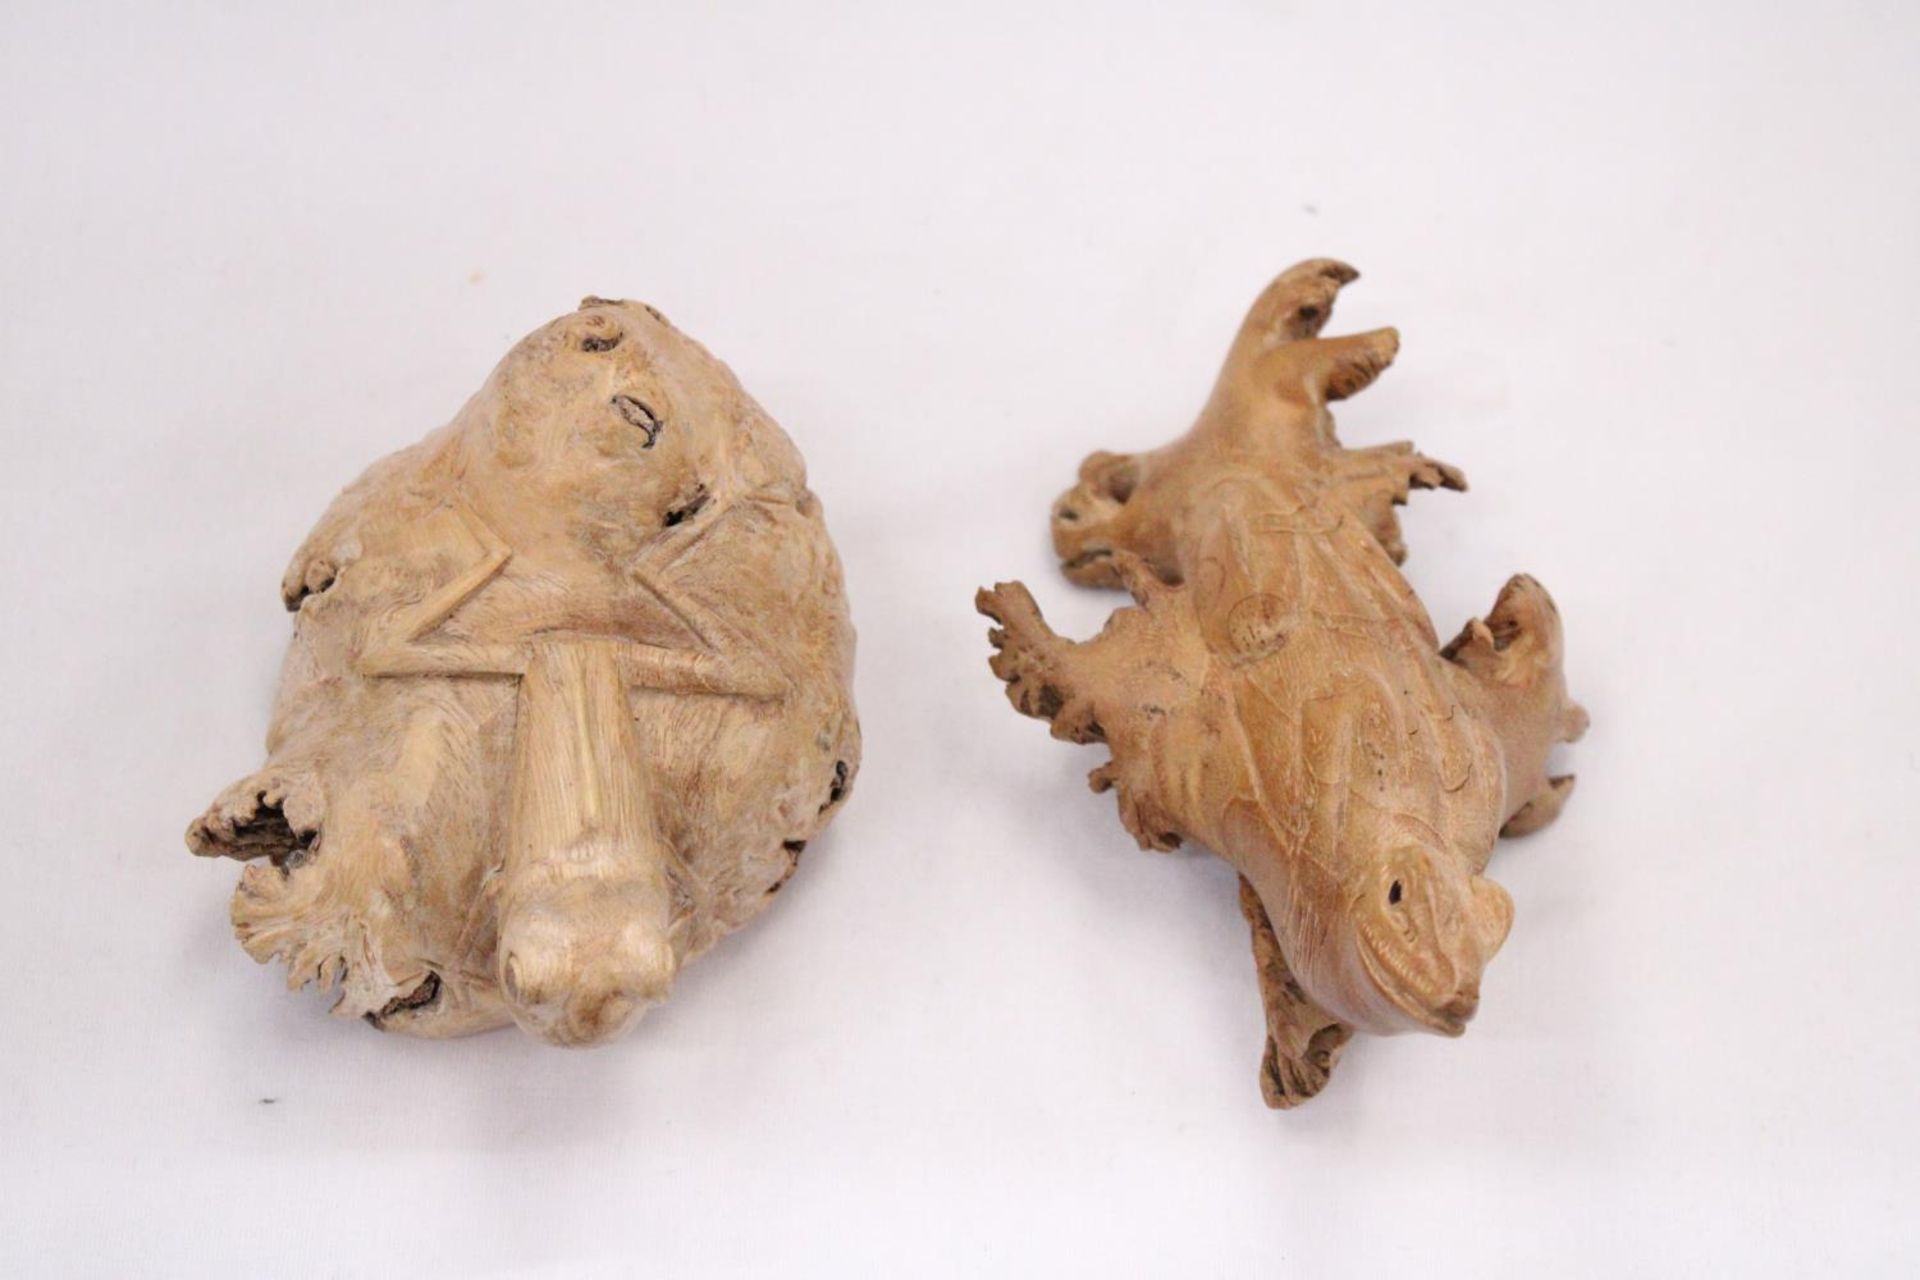 A VINTAGE CARVED DRIFTWOOD WOOD FROG AND LIZARD - Image 7 of 7